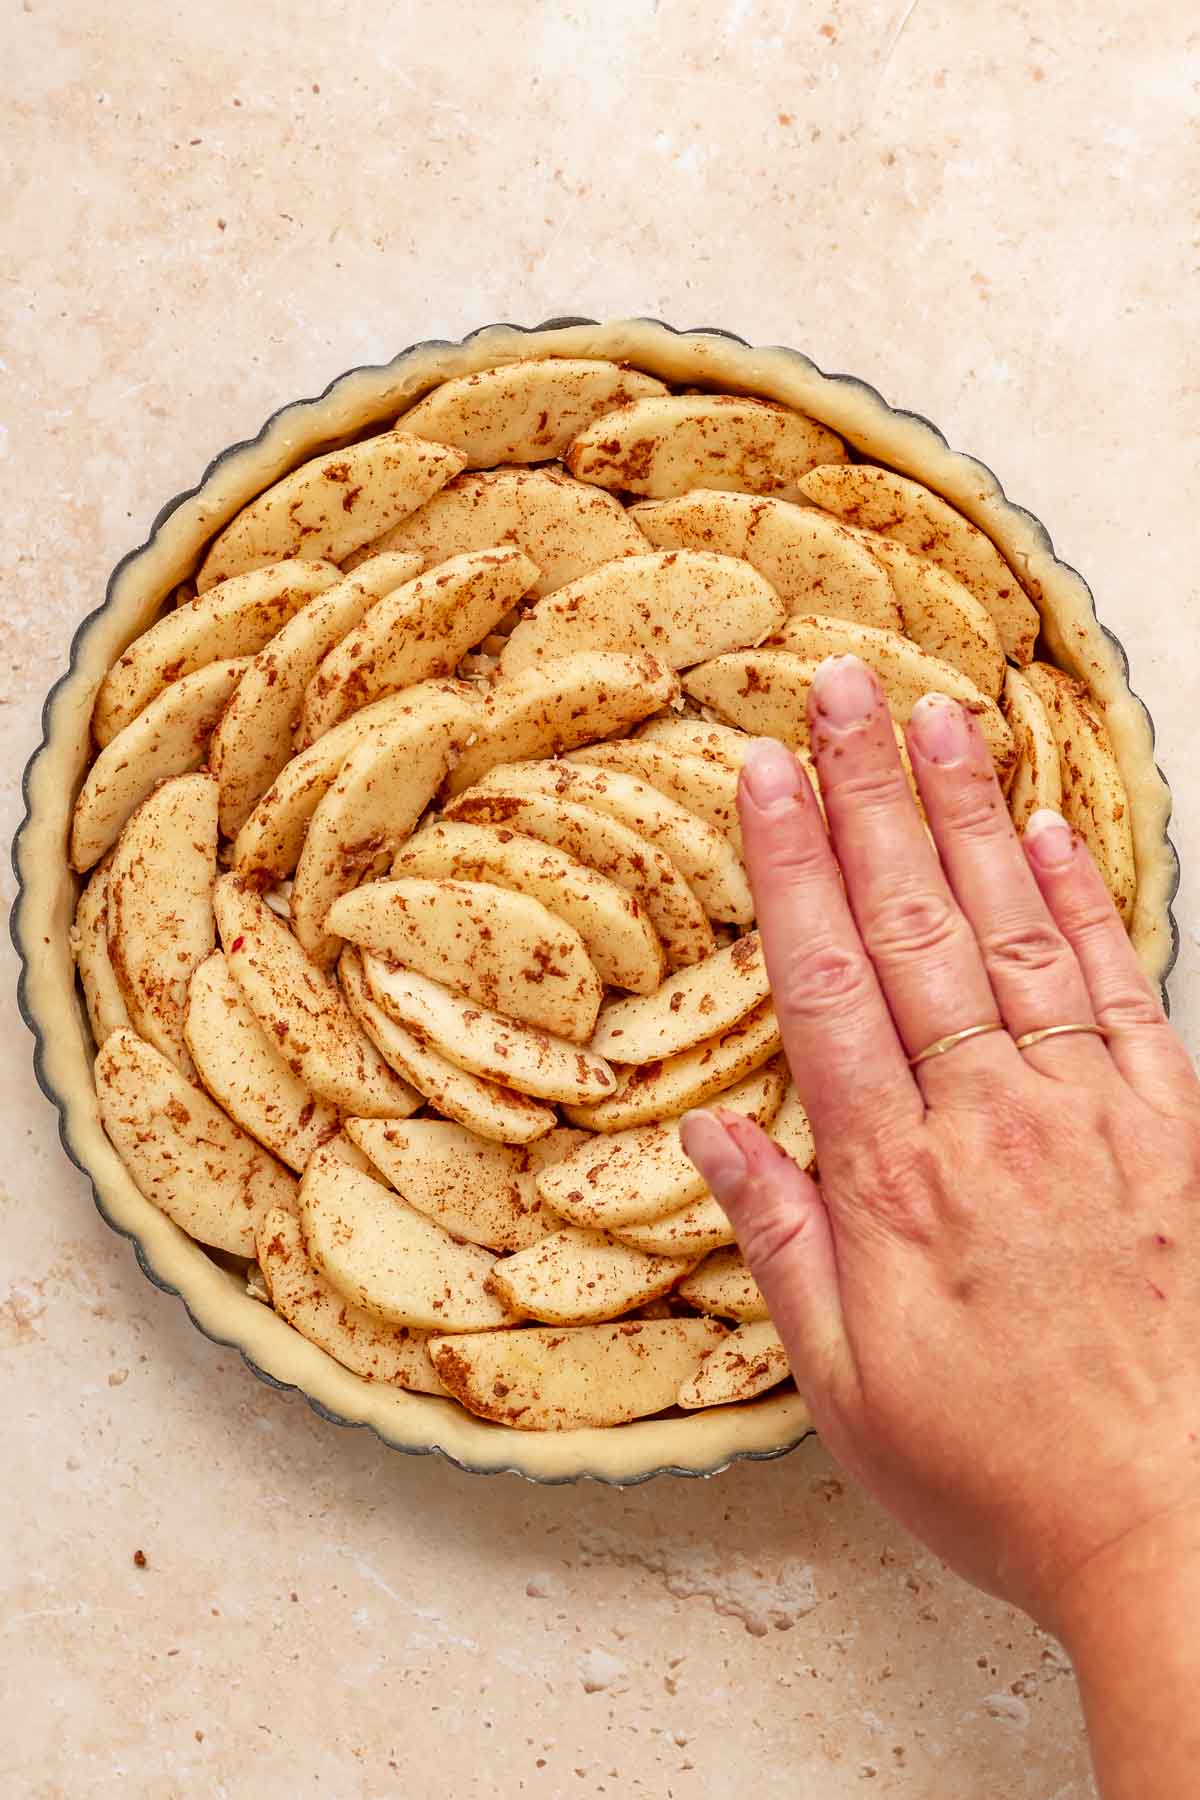 A hand pressed down on apples spiraled in a tart pan.